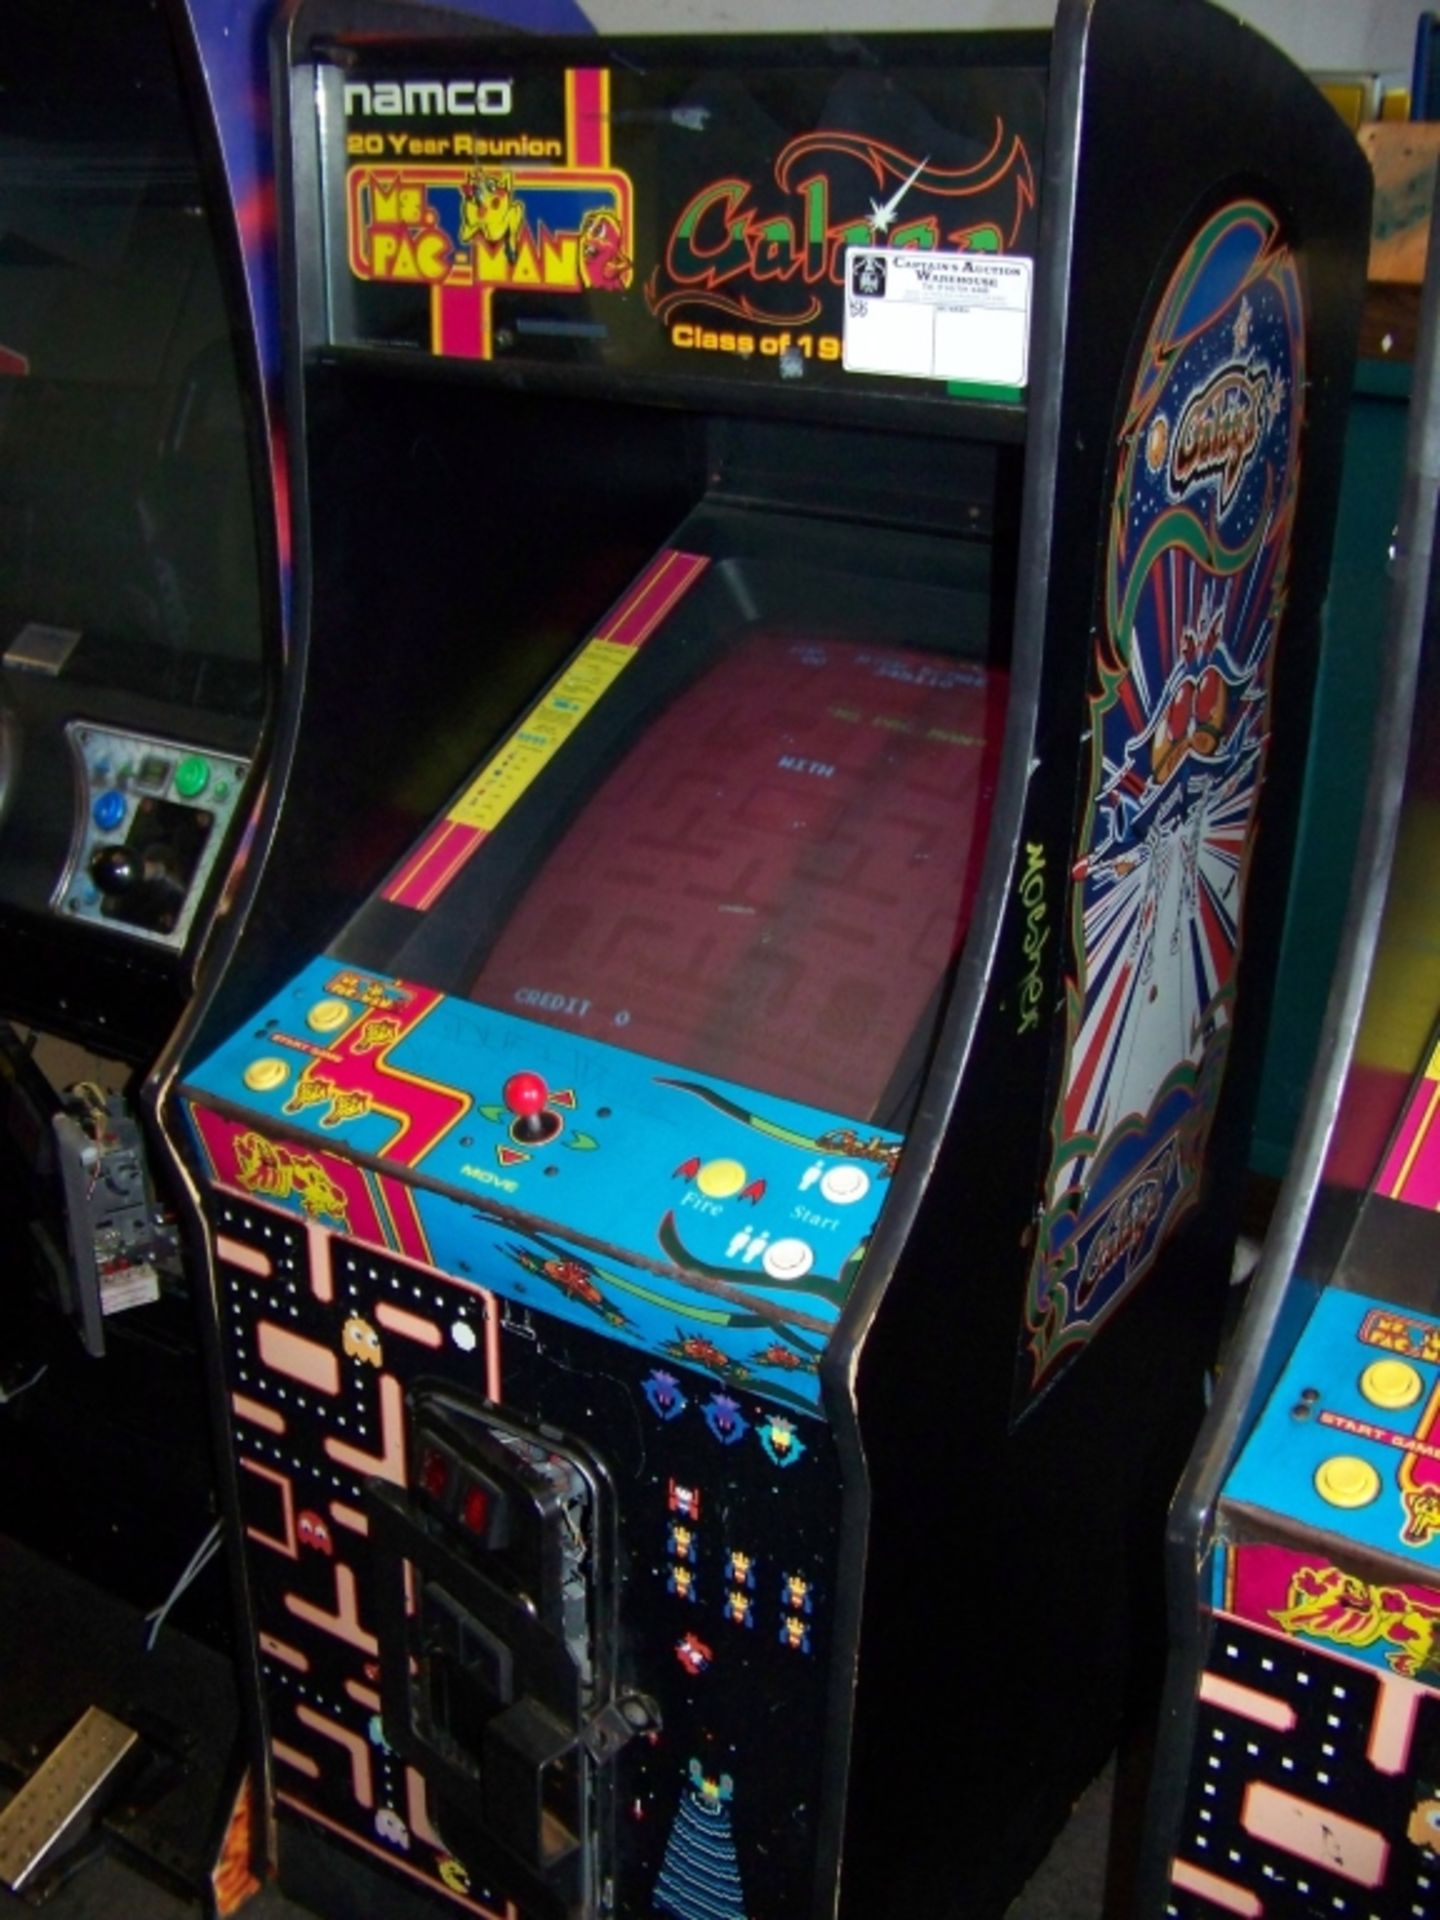 CLASS OF 1981 GALAGA MS. PACMAN ARCADE GAME NAMCO Item is in used condition. Evidence of wear and